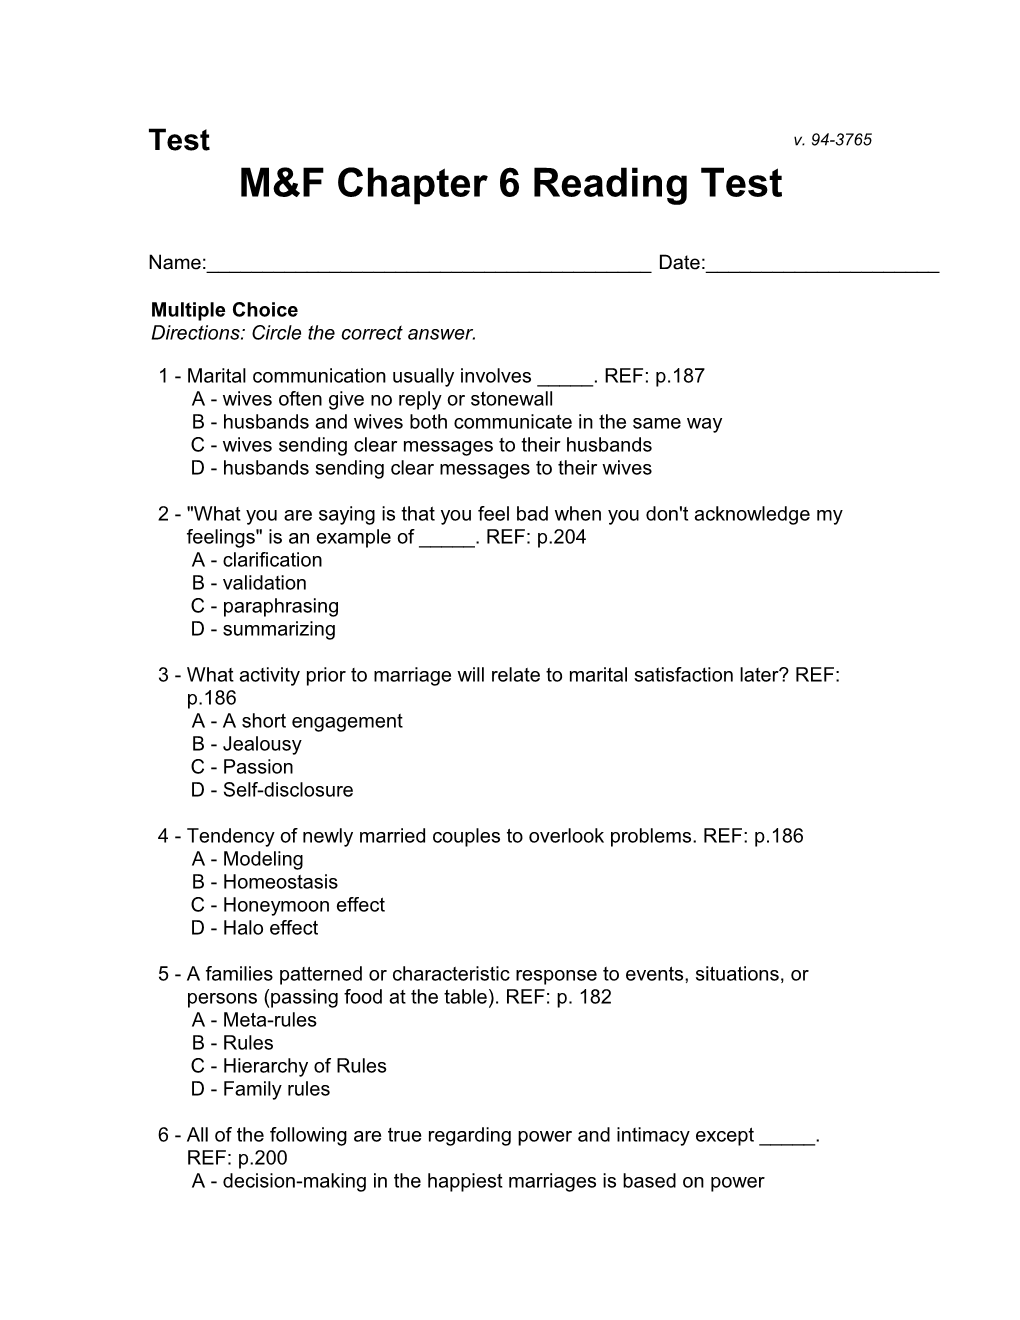 M&F Chapter 6 Reading Test